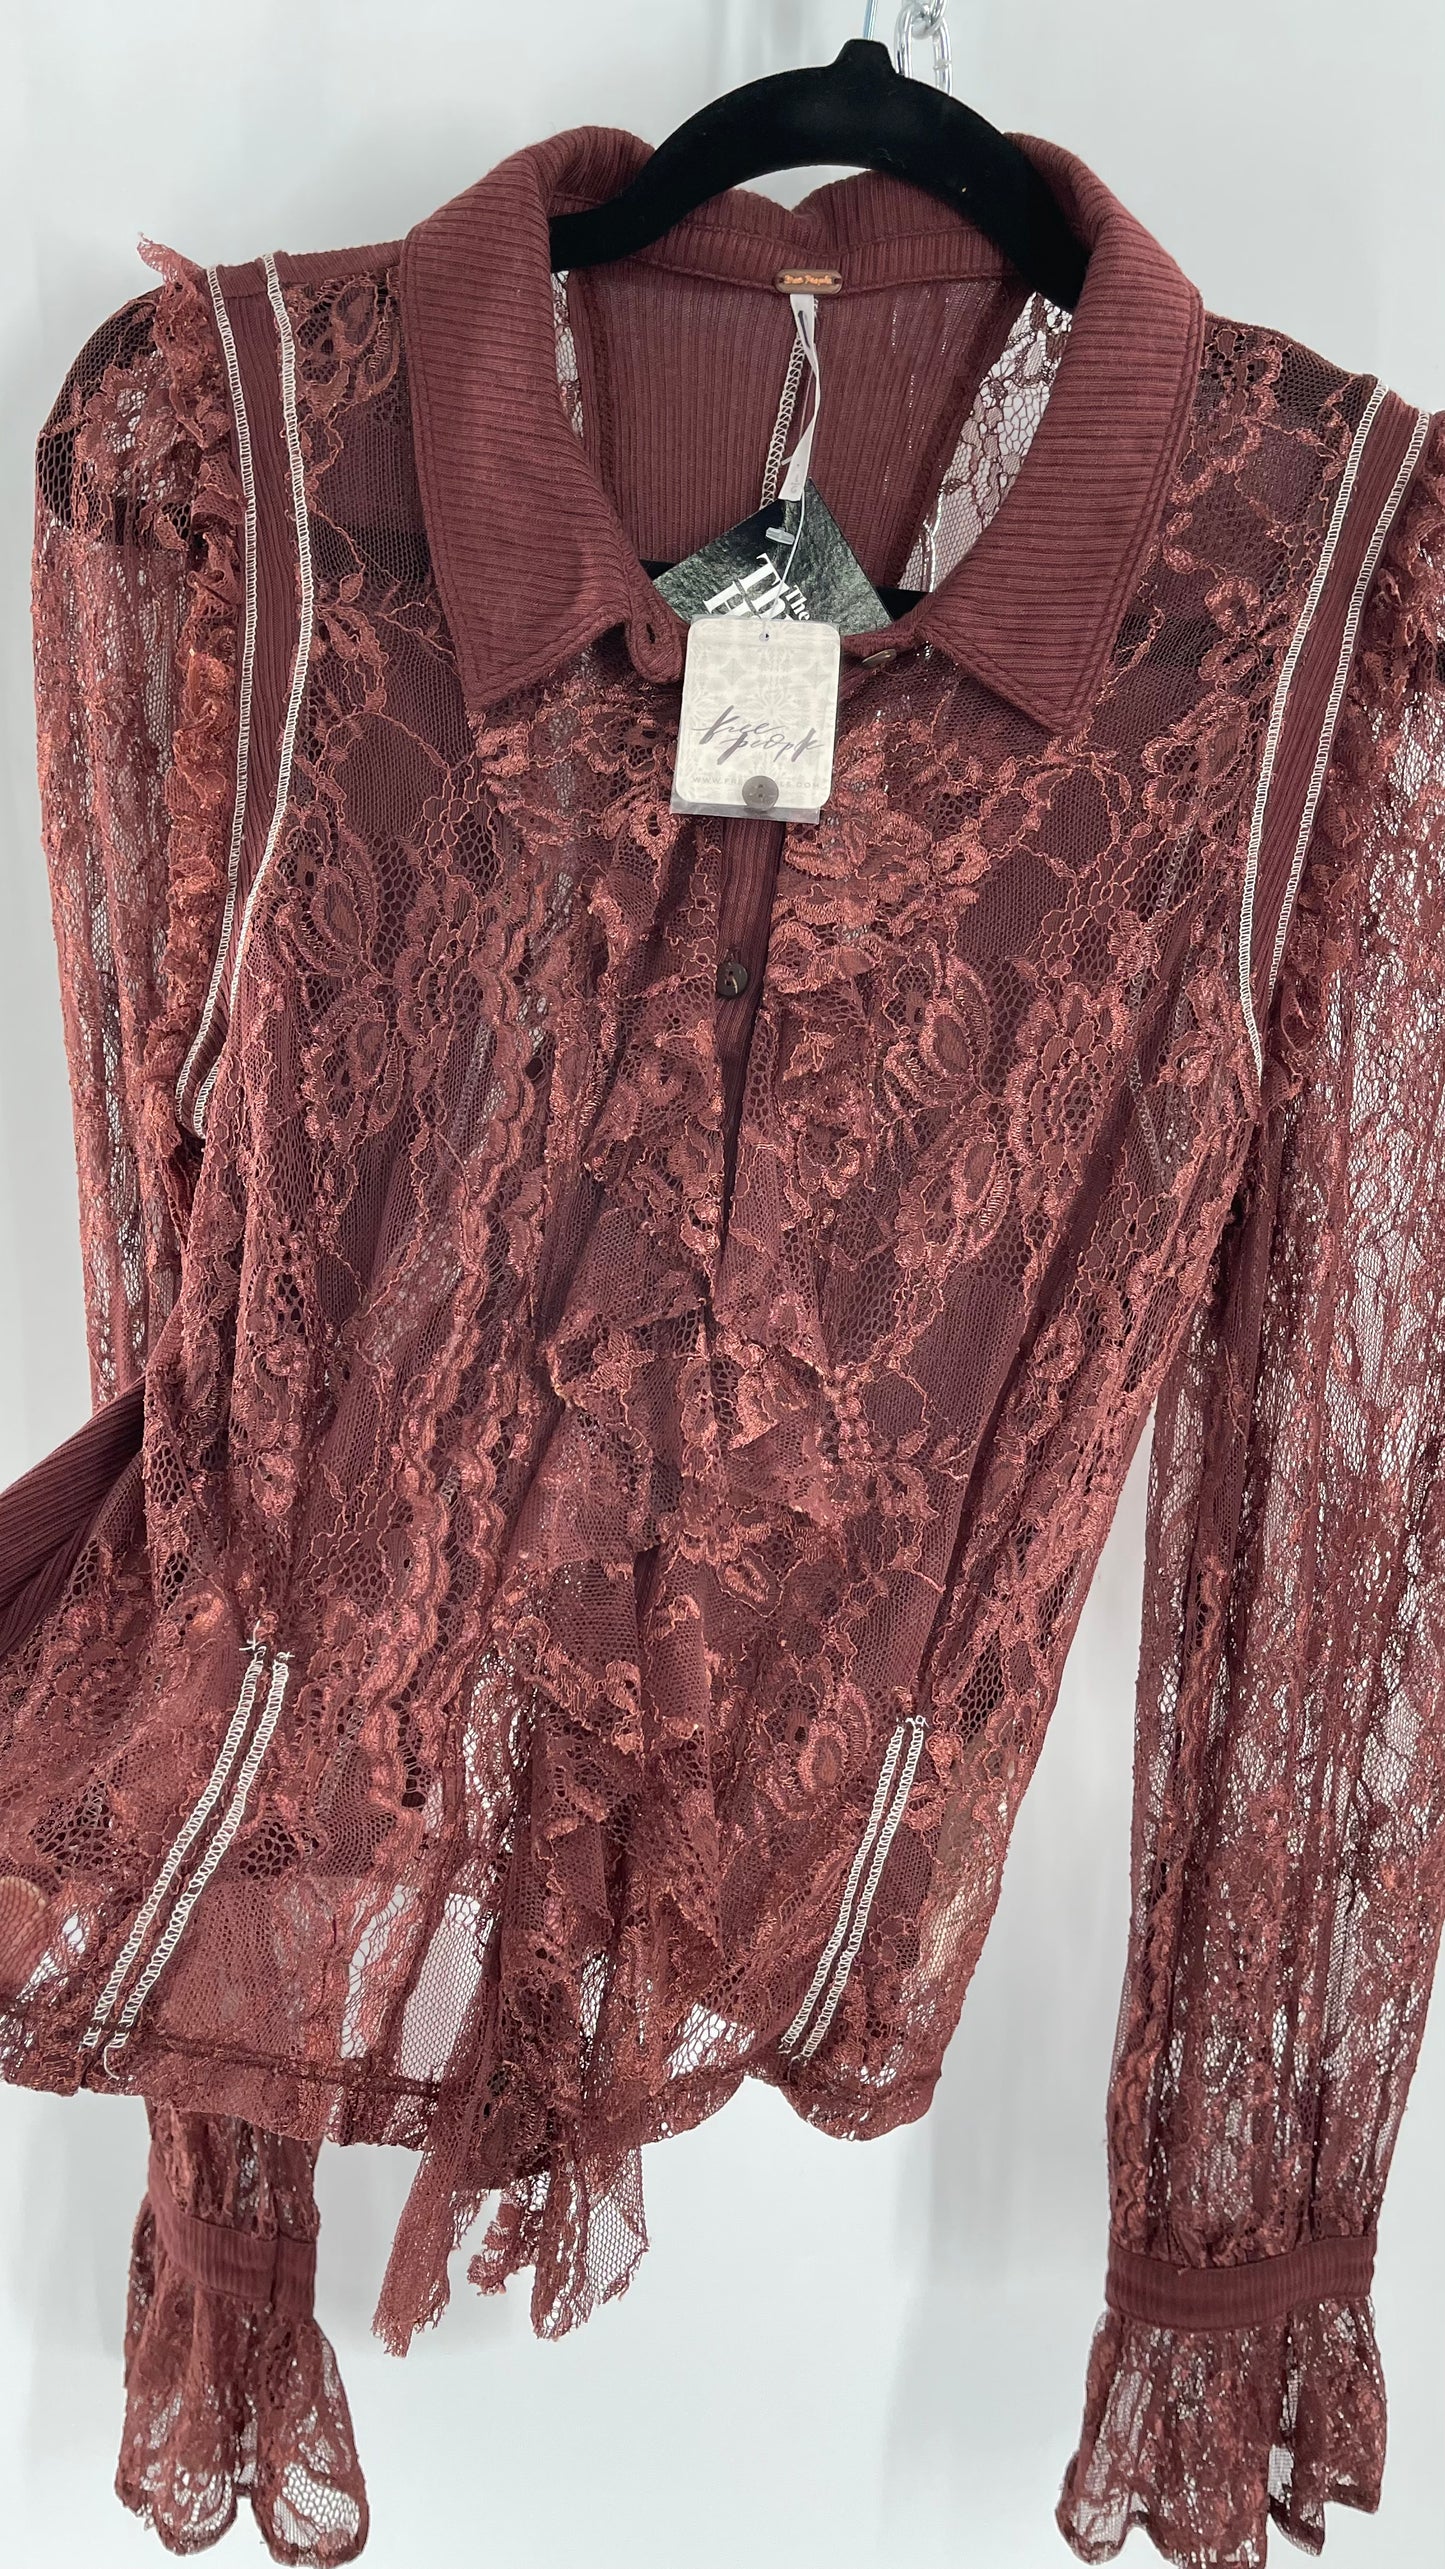 Free People Maroon Burgundy Lace Button Front Blouse with Ruffled Bodice with Tags Attached (Large)